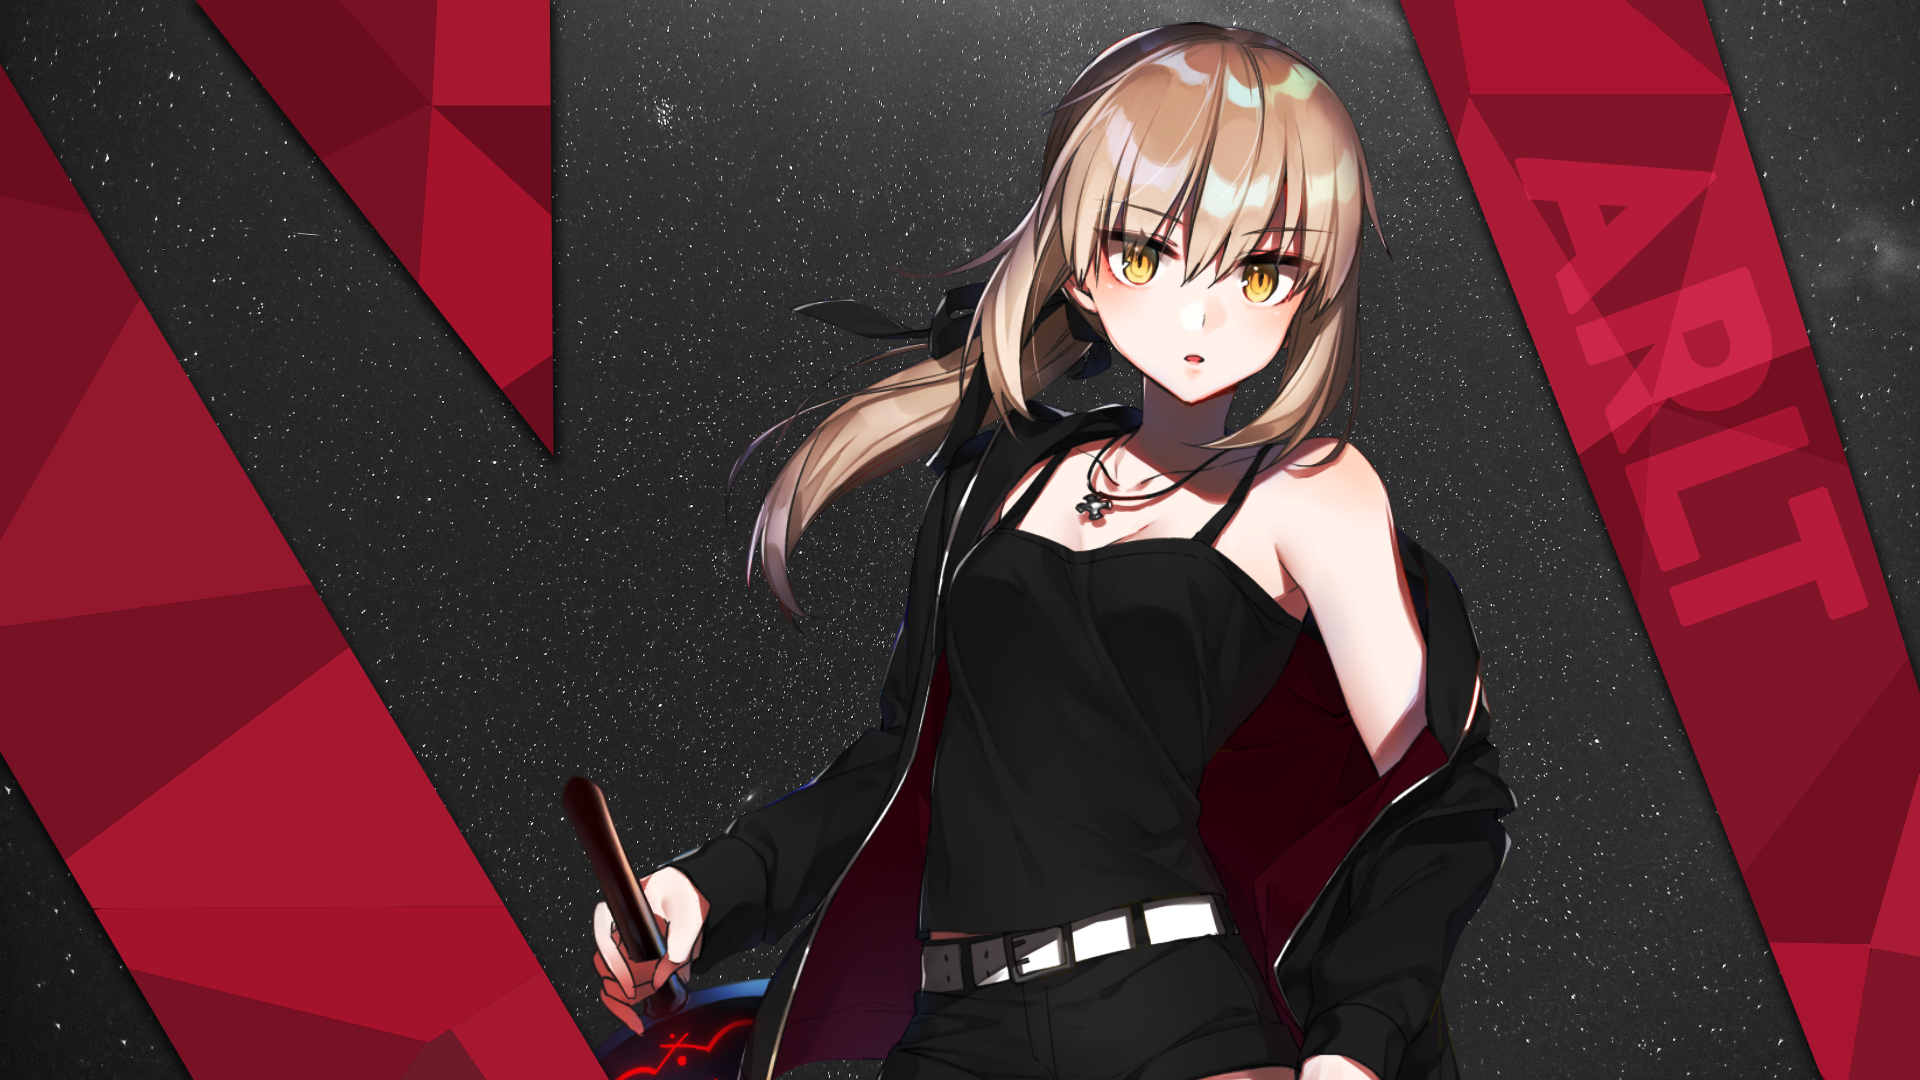 Fate Grand Order Saber Fate Grand Order Simple Background Anime Girls Anime 1920x1080